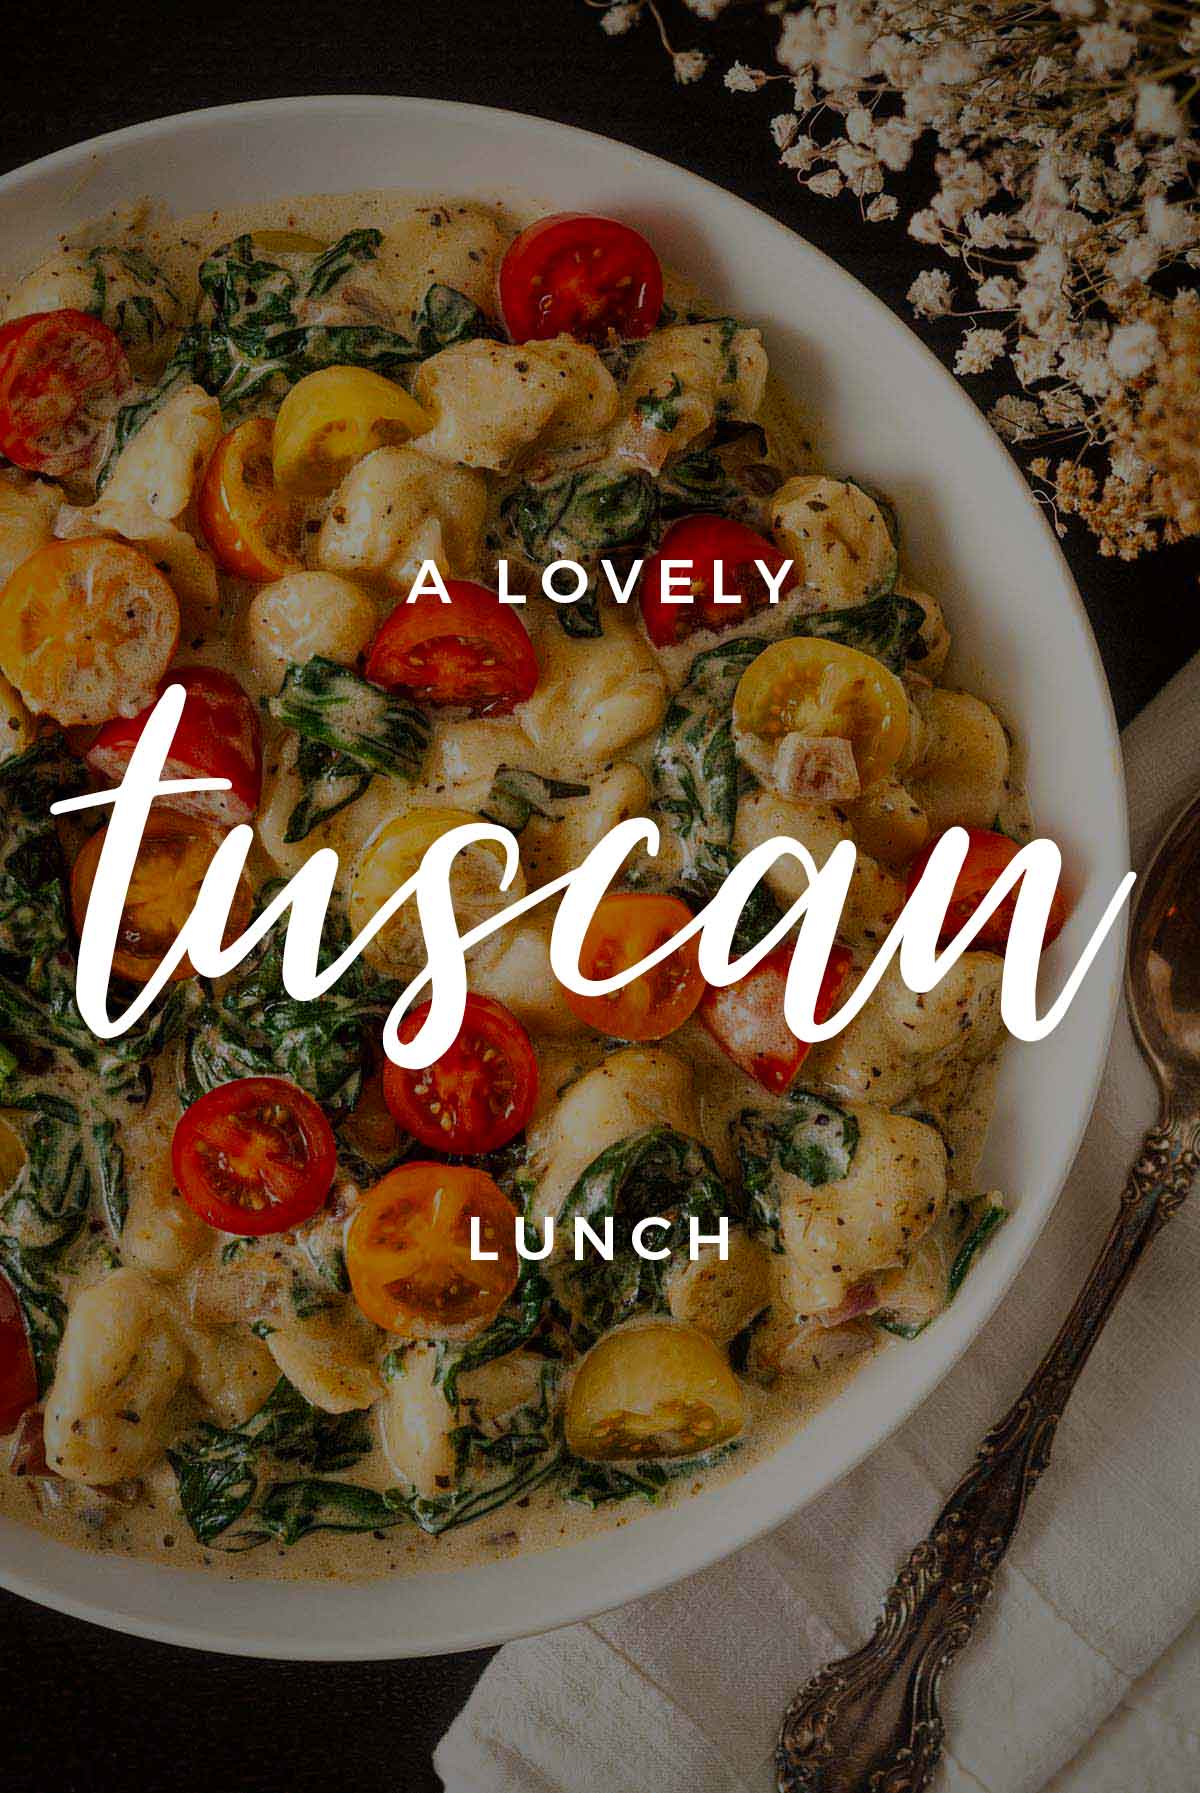 A bowl of gnocchi with a title that says "A Lovely Tuscan Lunch."